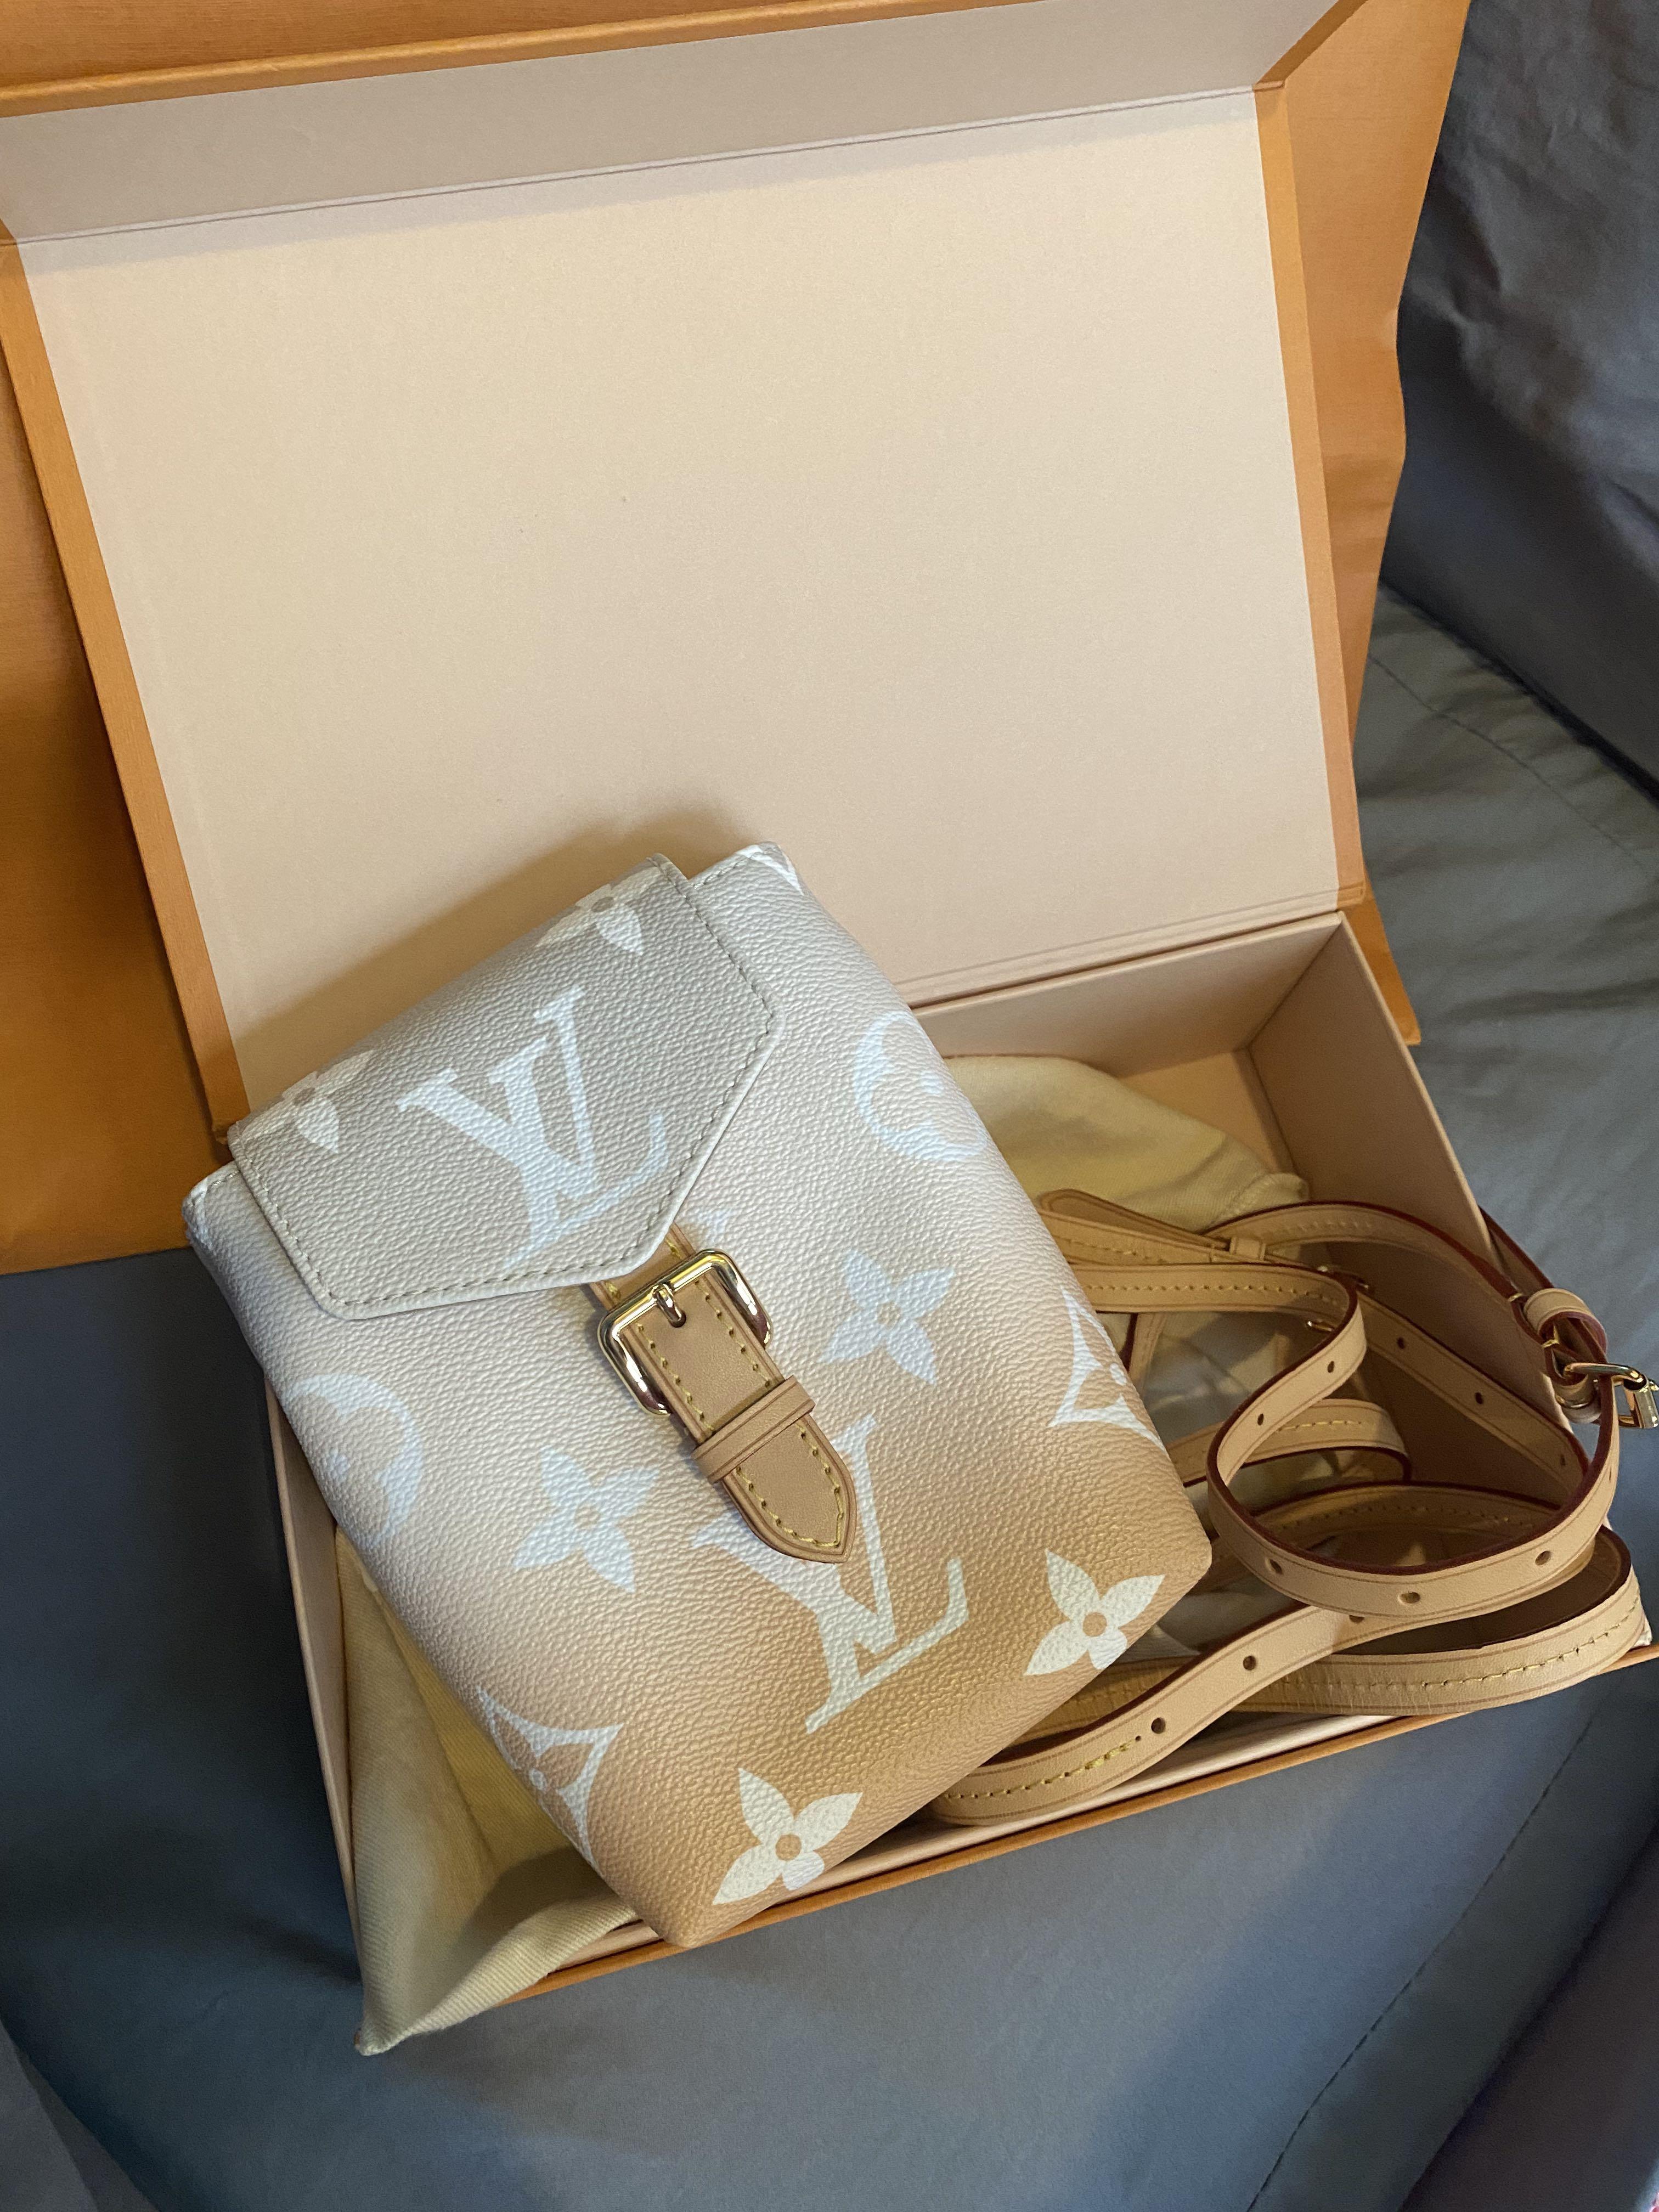 Louis Vuitton Monogram By The Pool Mist Grey Tiny Backpack - AWL2276